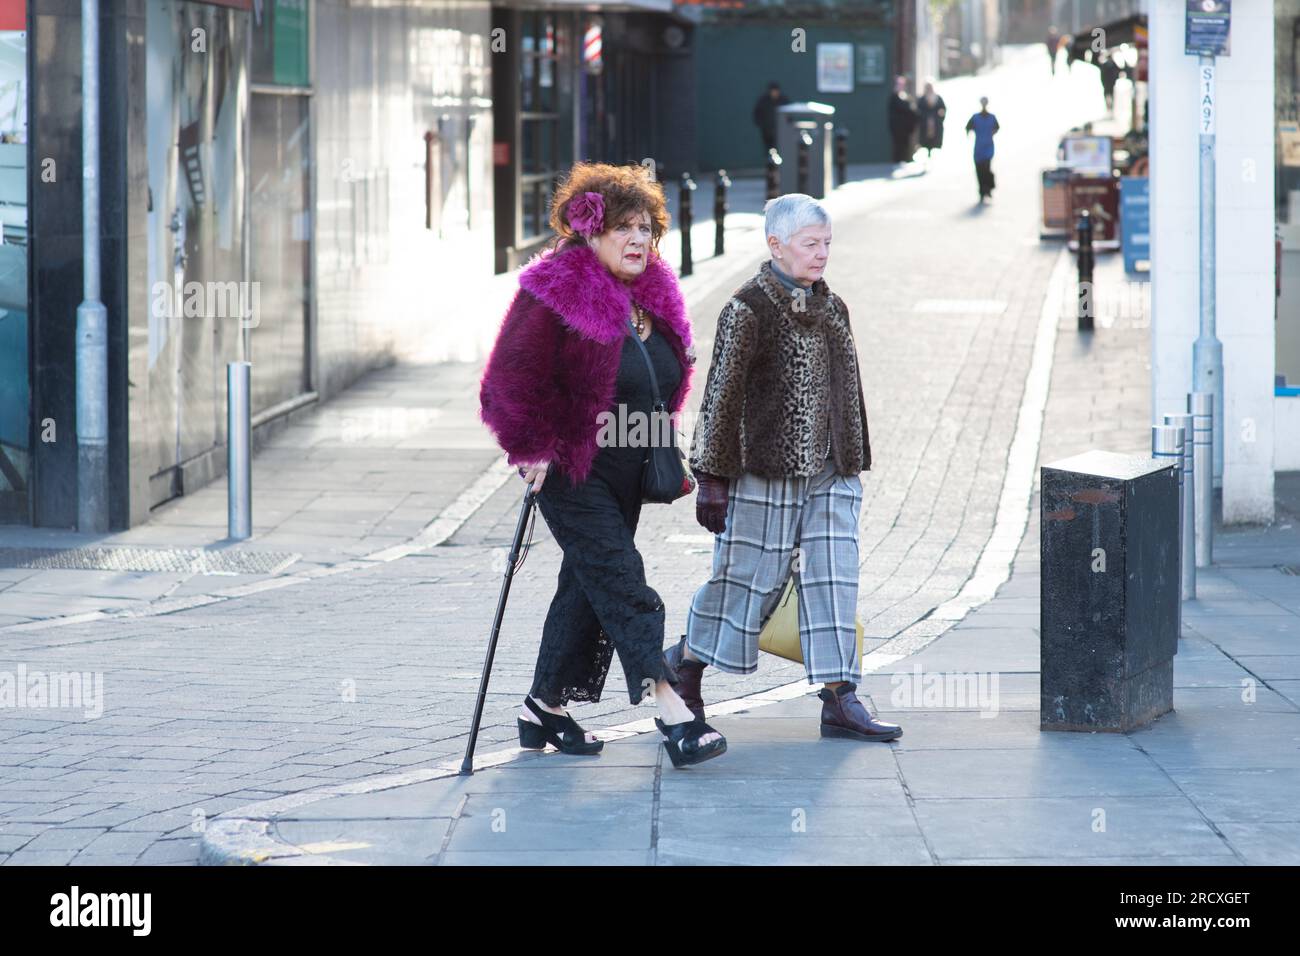 Two old. ladies, back in time. Stock Photo